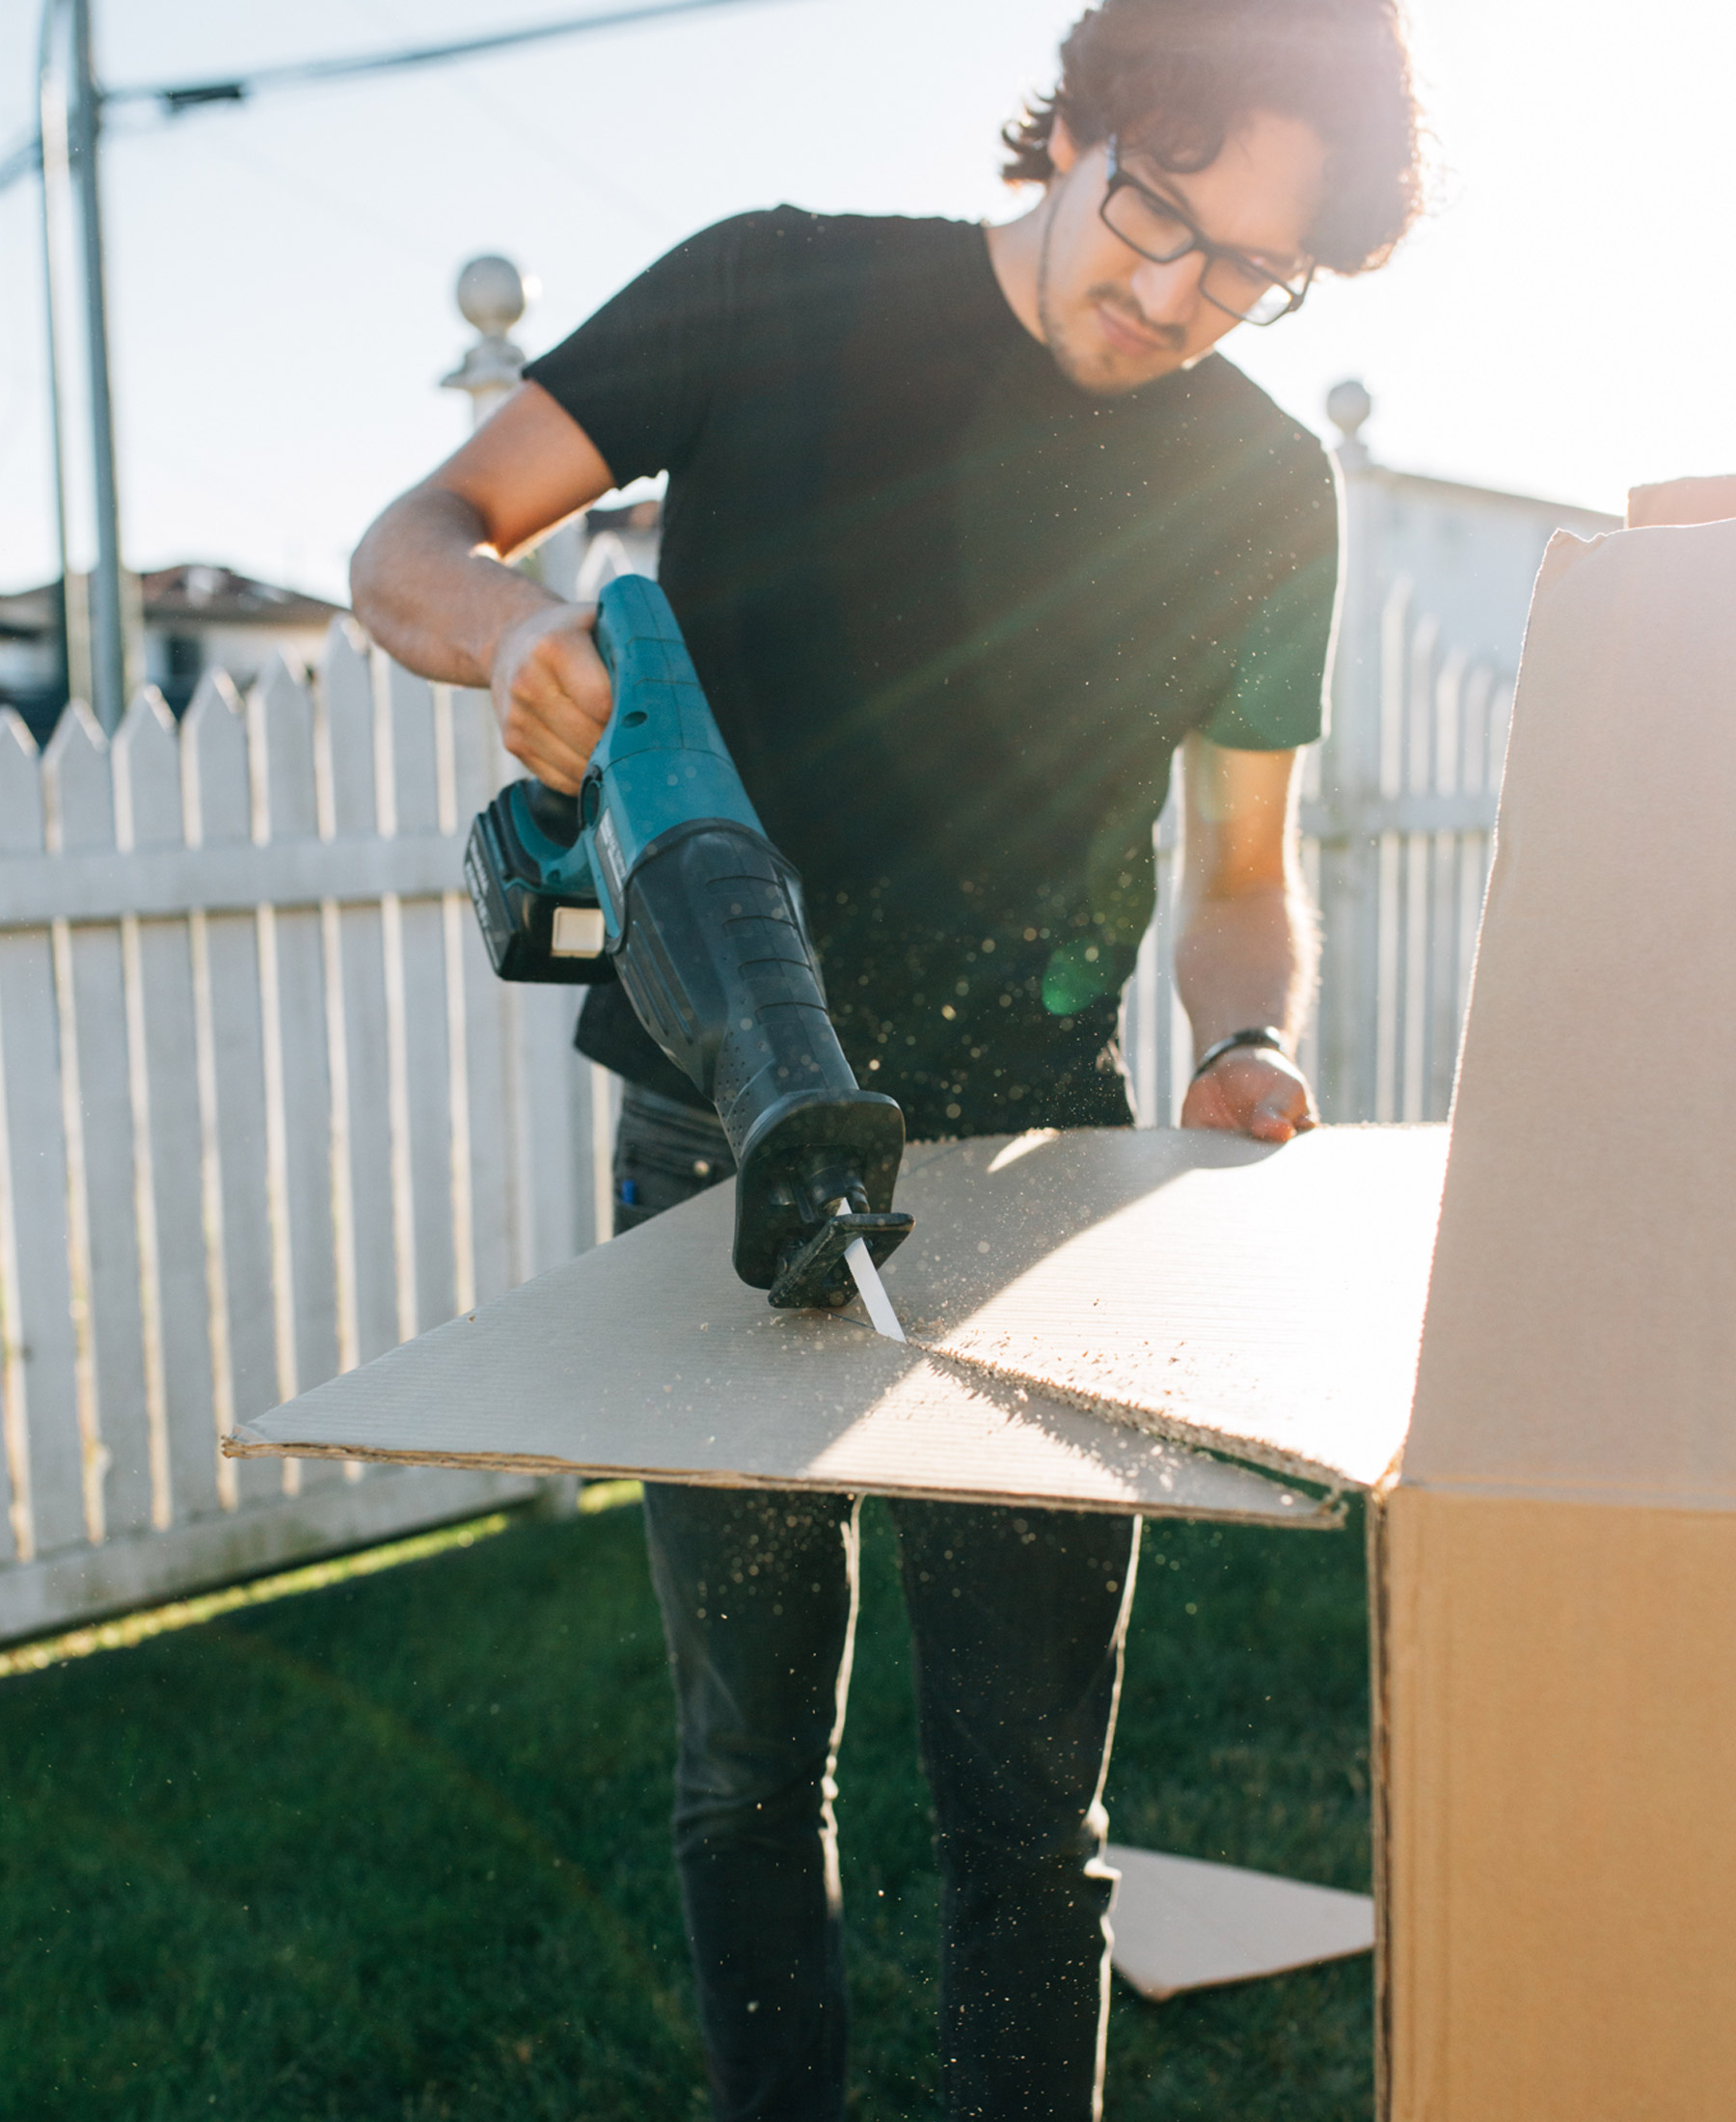 Jorge cuts into a cardboard box using a reciprocating saw to create pieces for a box fort.